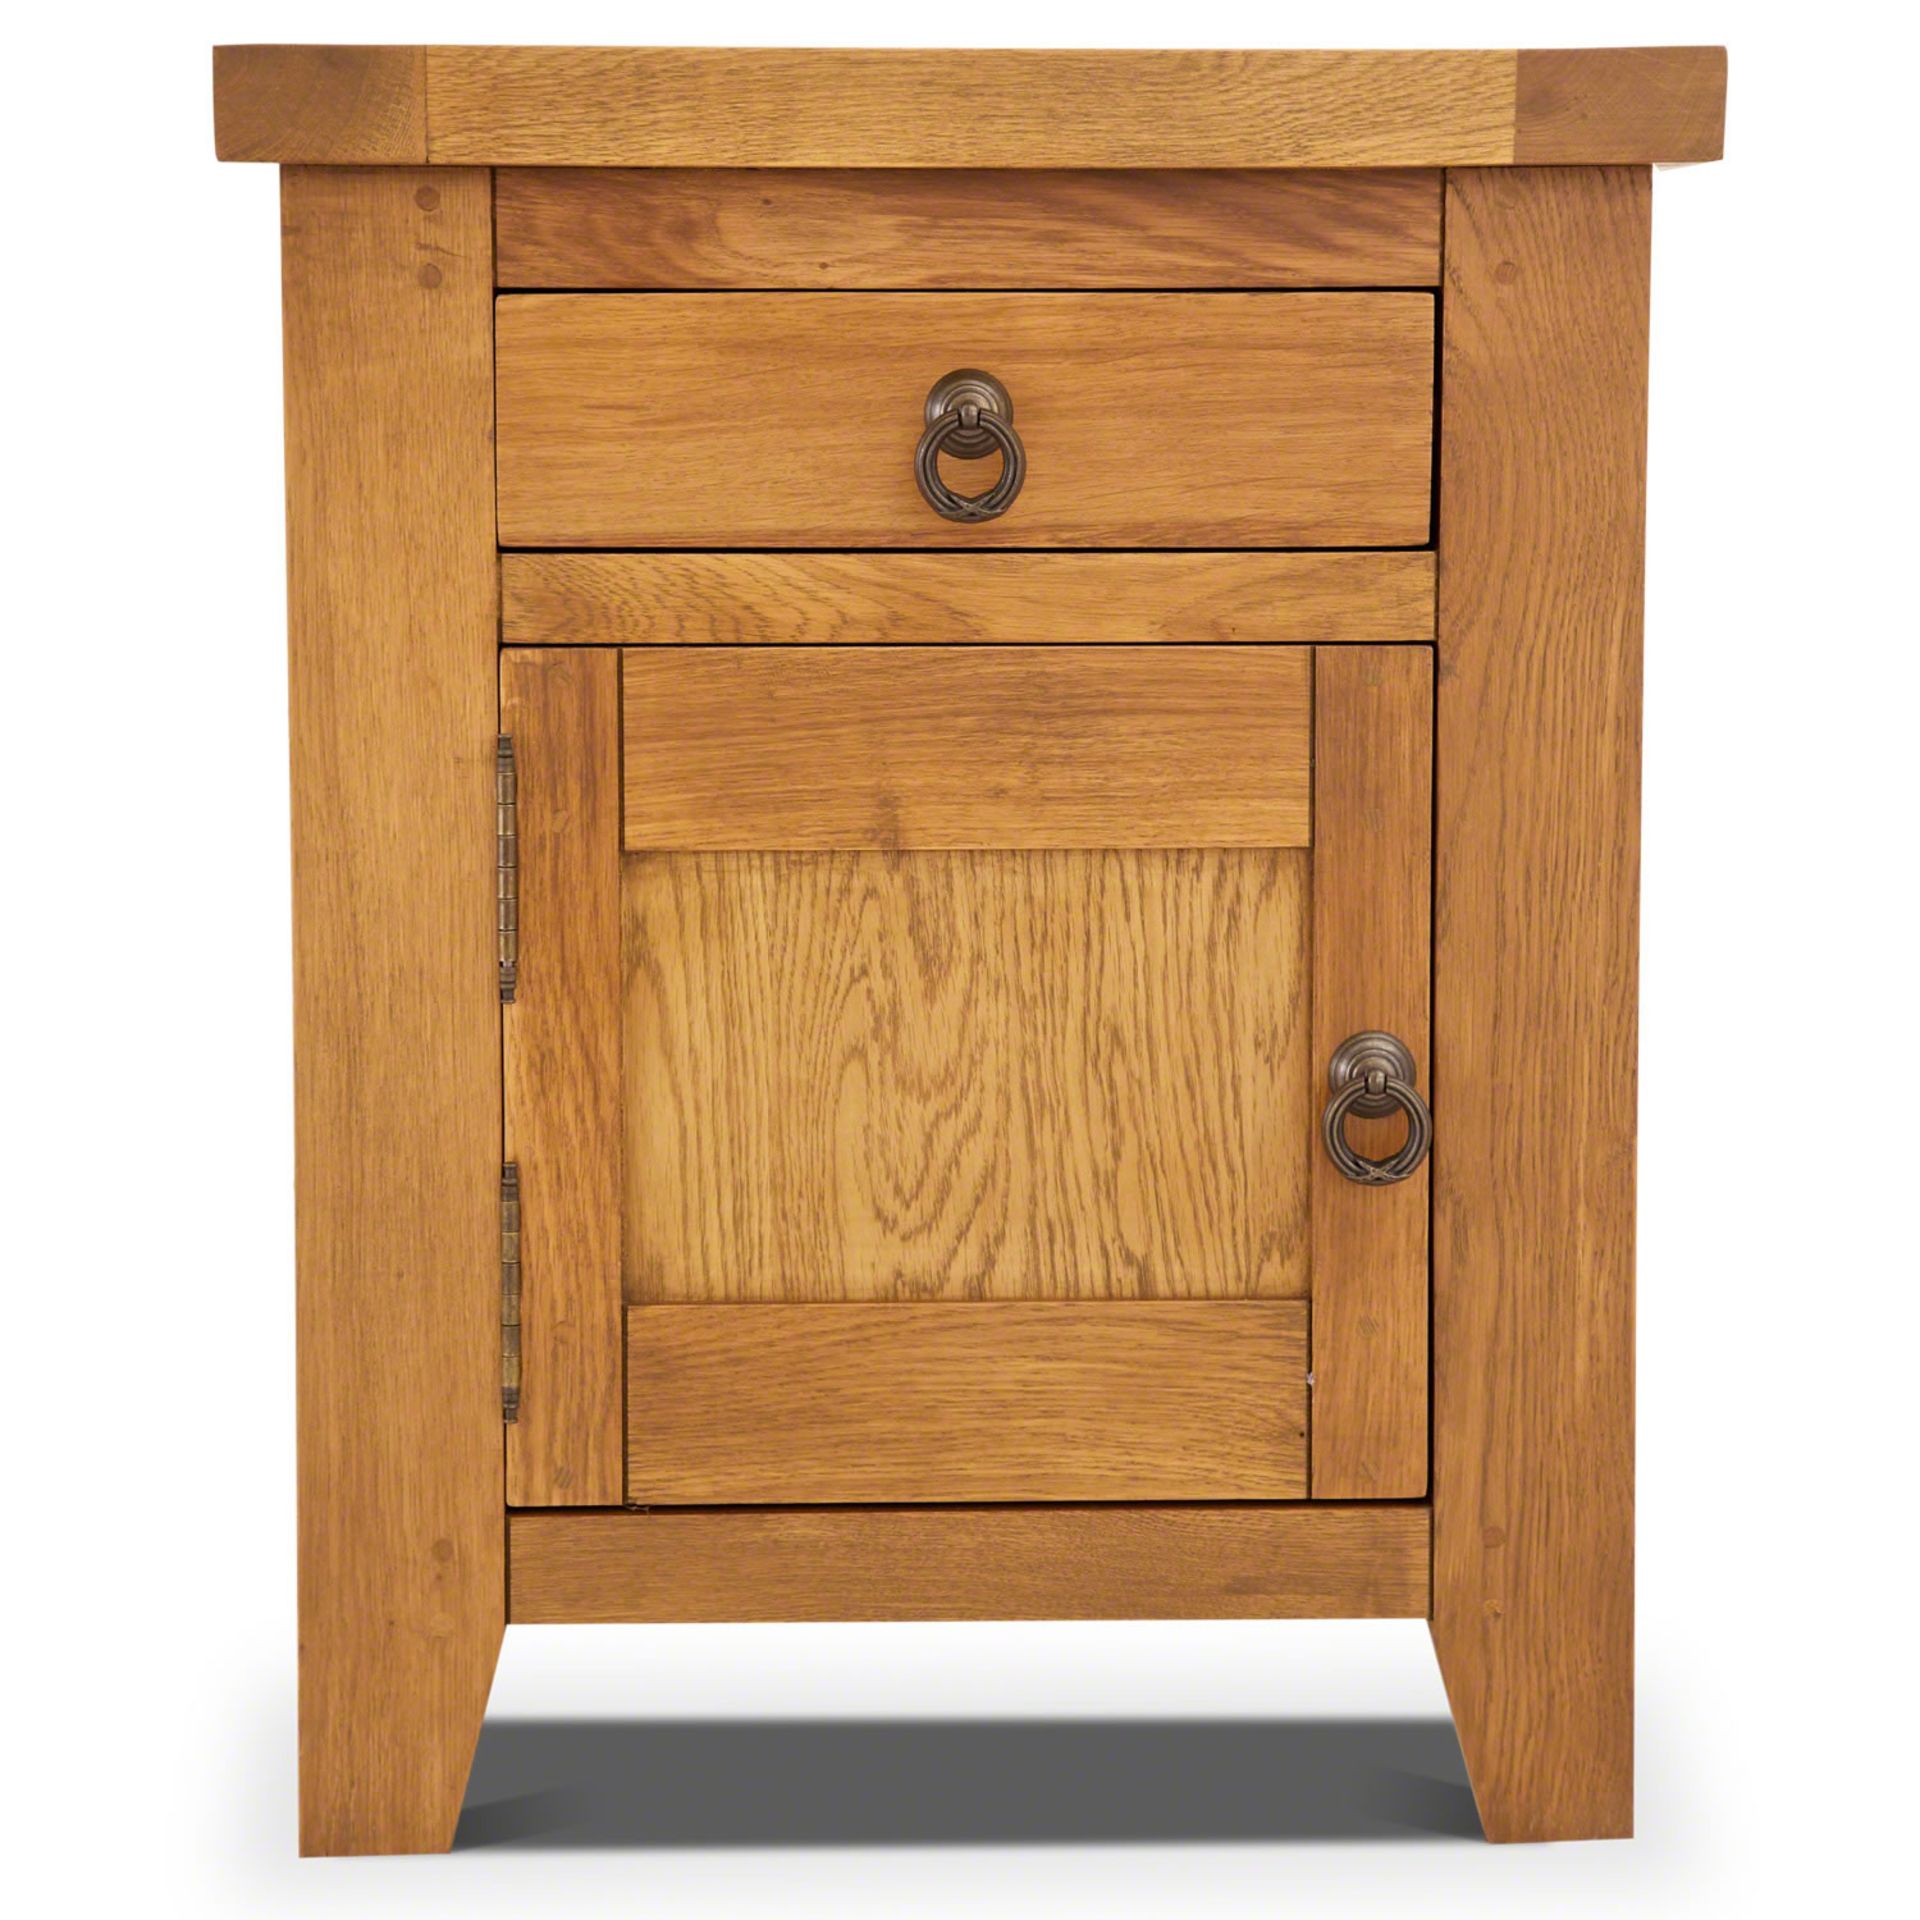 Sturdy oak bedside cabinet, perfect for those who like a classic feel to their bedroom.